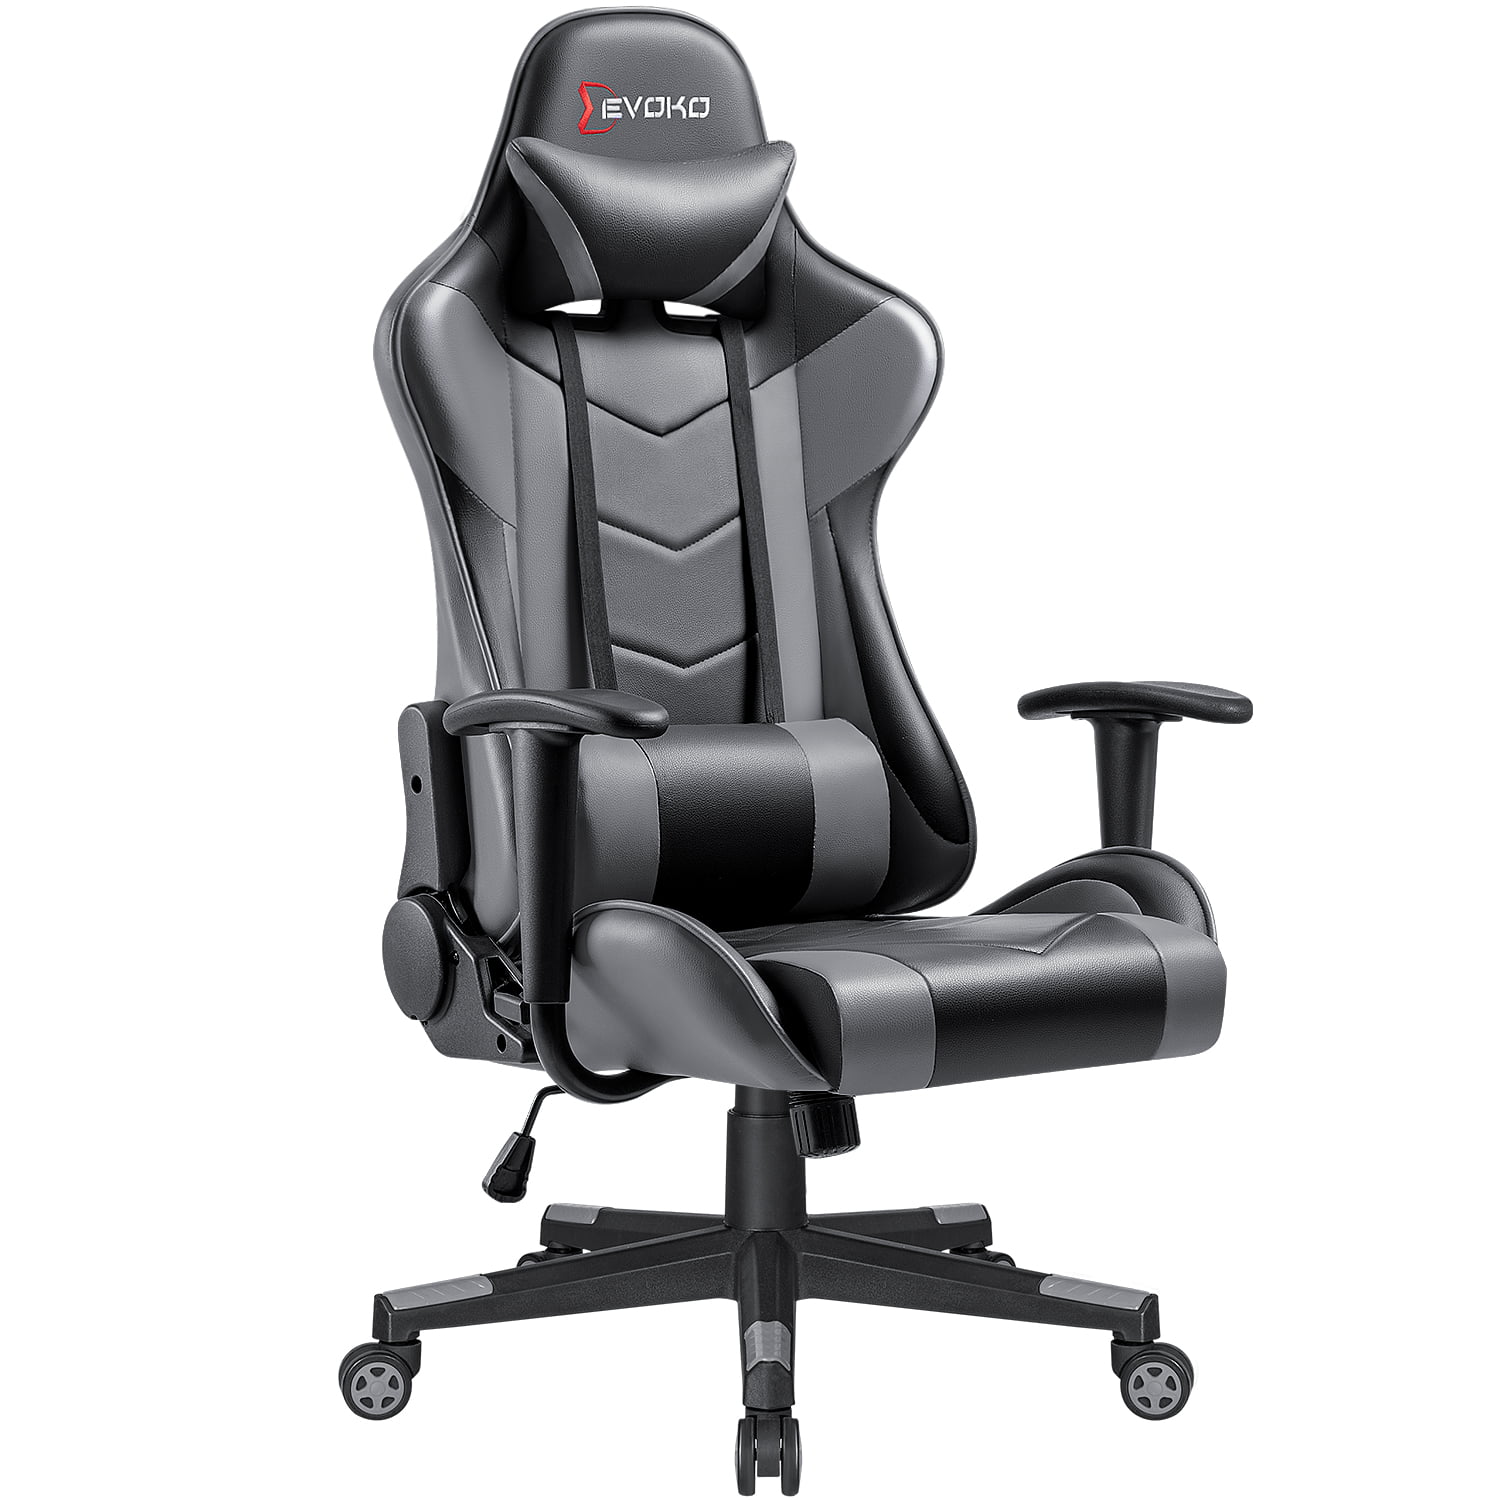 Ergonomic Executive Office Chair Race Styled Gaming Seat Lumbar Support w/ 